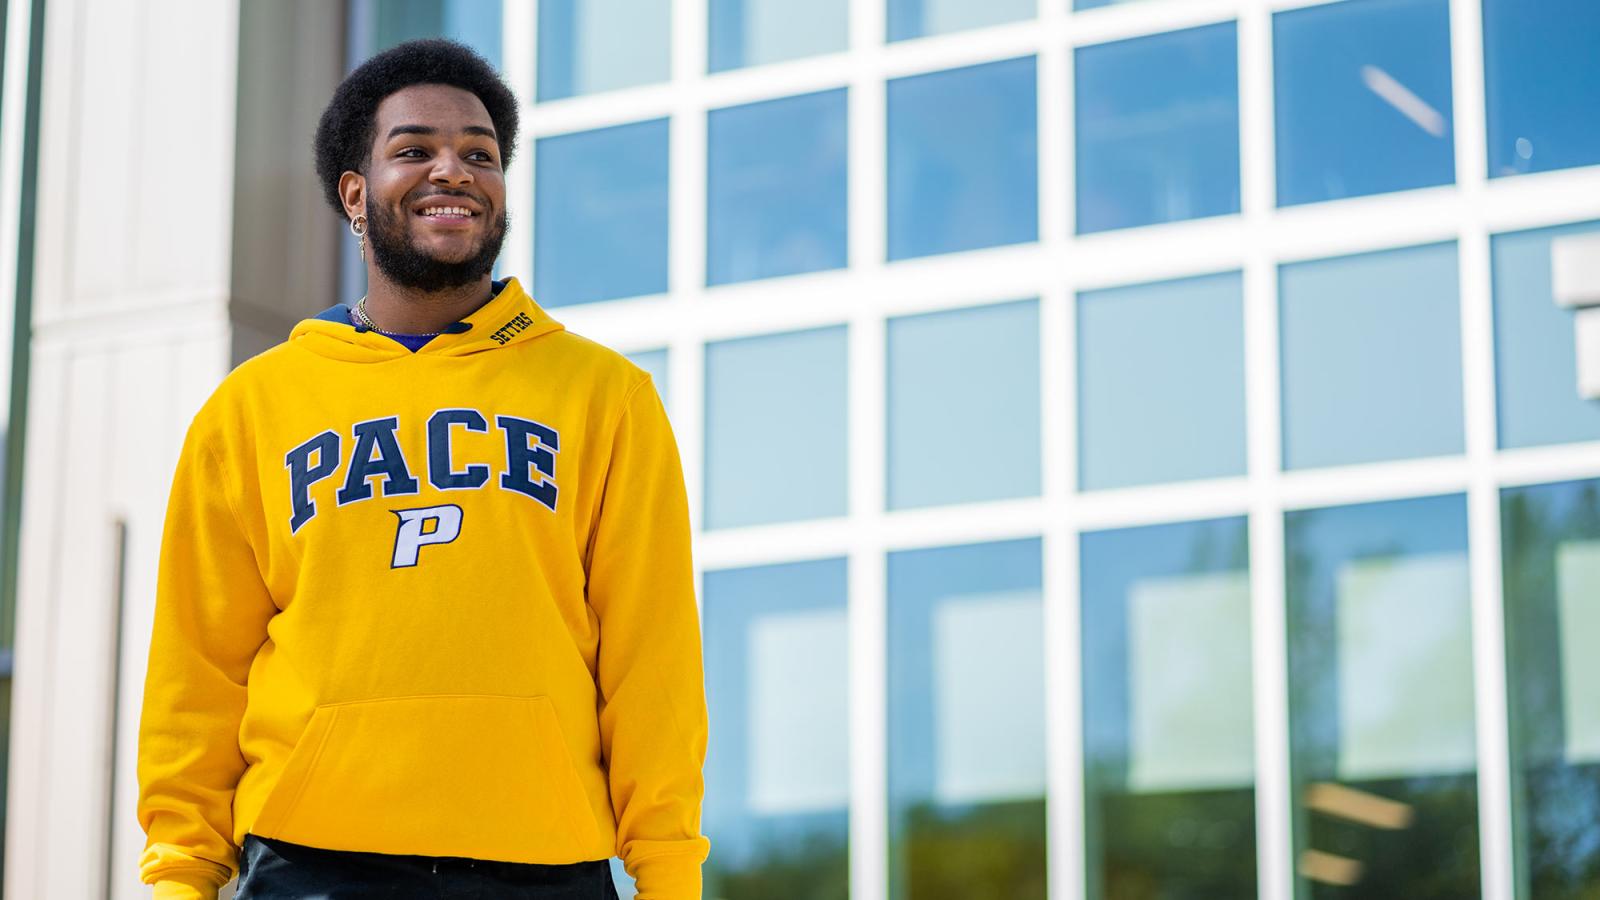 Pace Student D'Andre Butler where's a yellow Pace sweatshirt